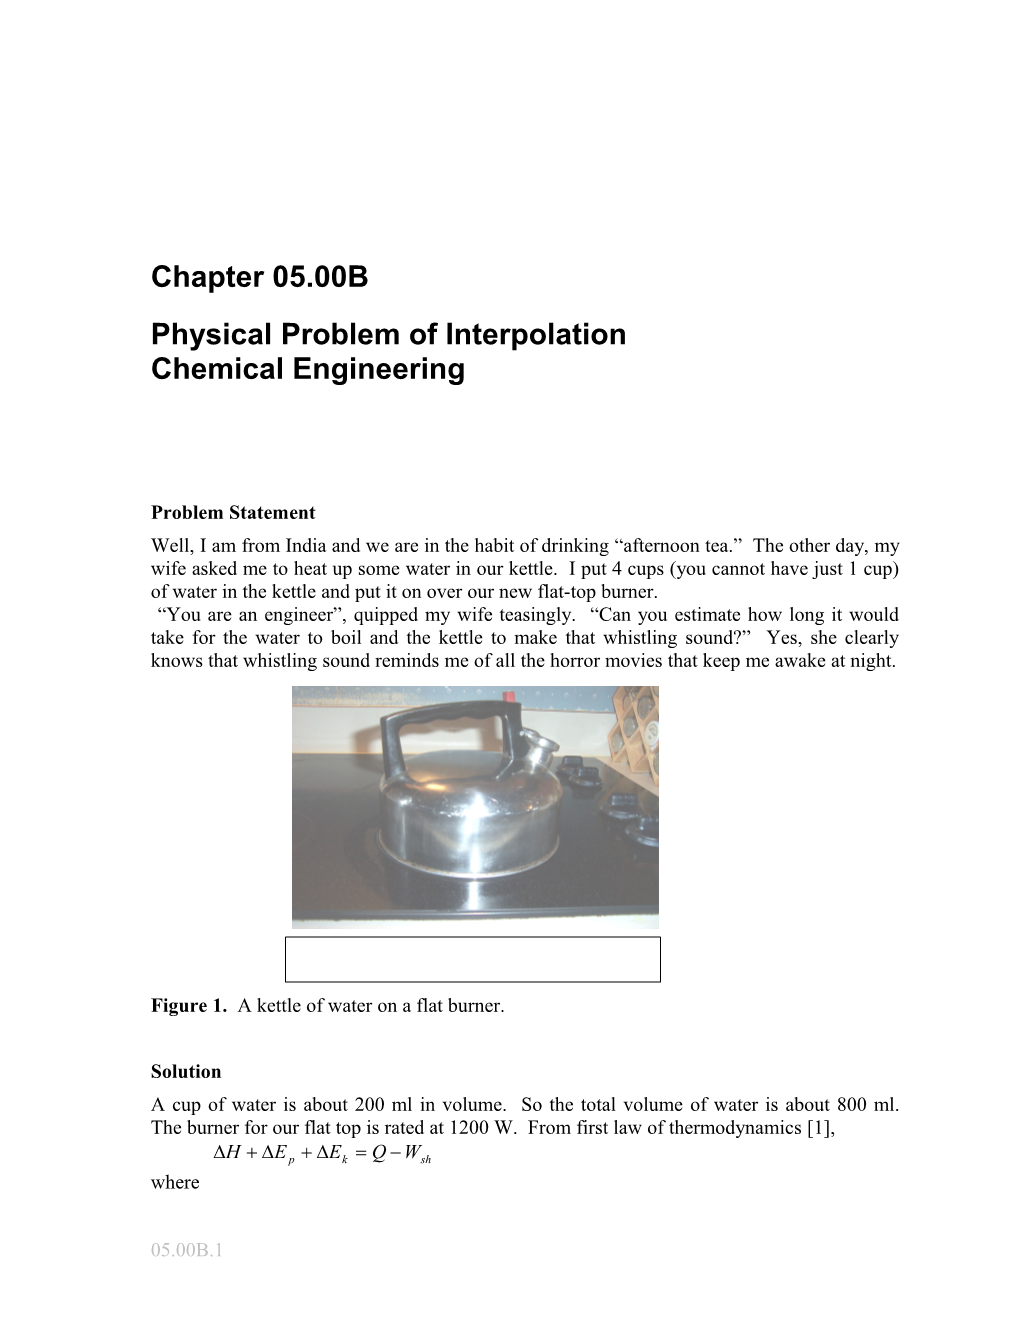 Physical Problem Textbook Notes: Interpolation: Chemical Engineering